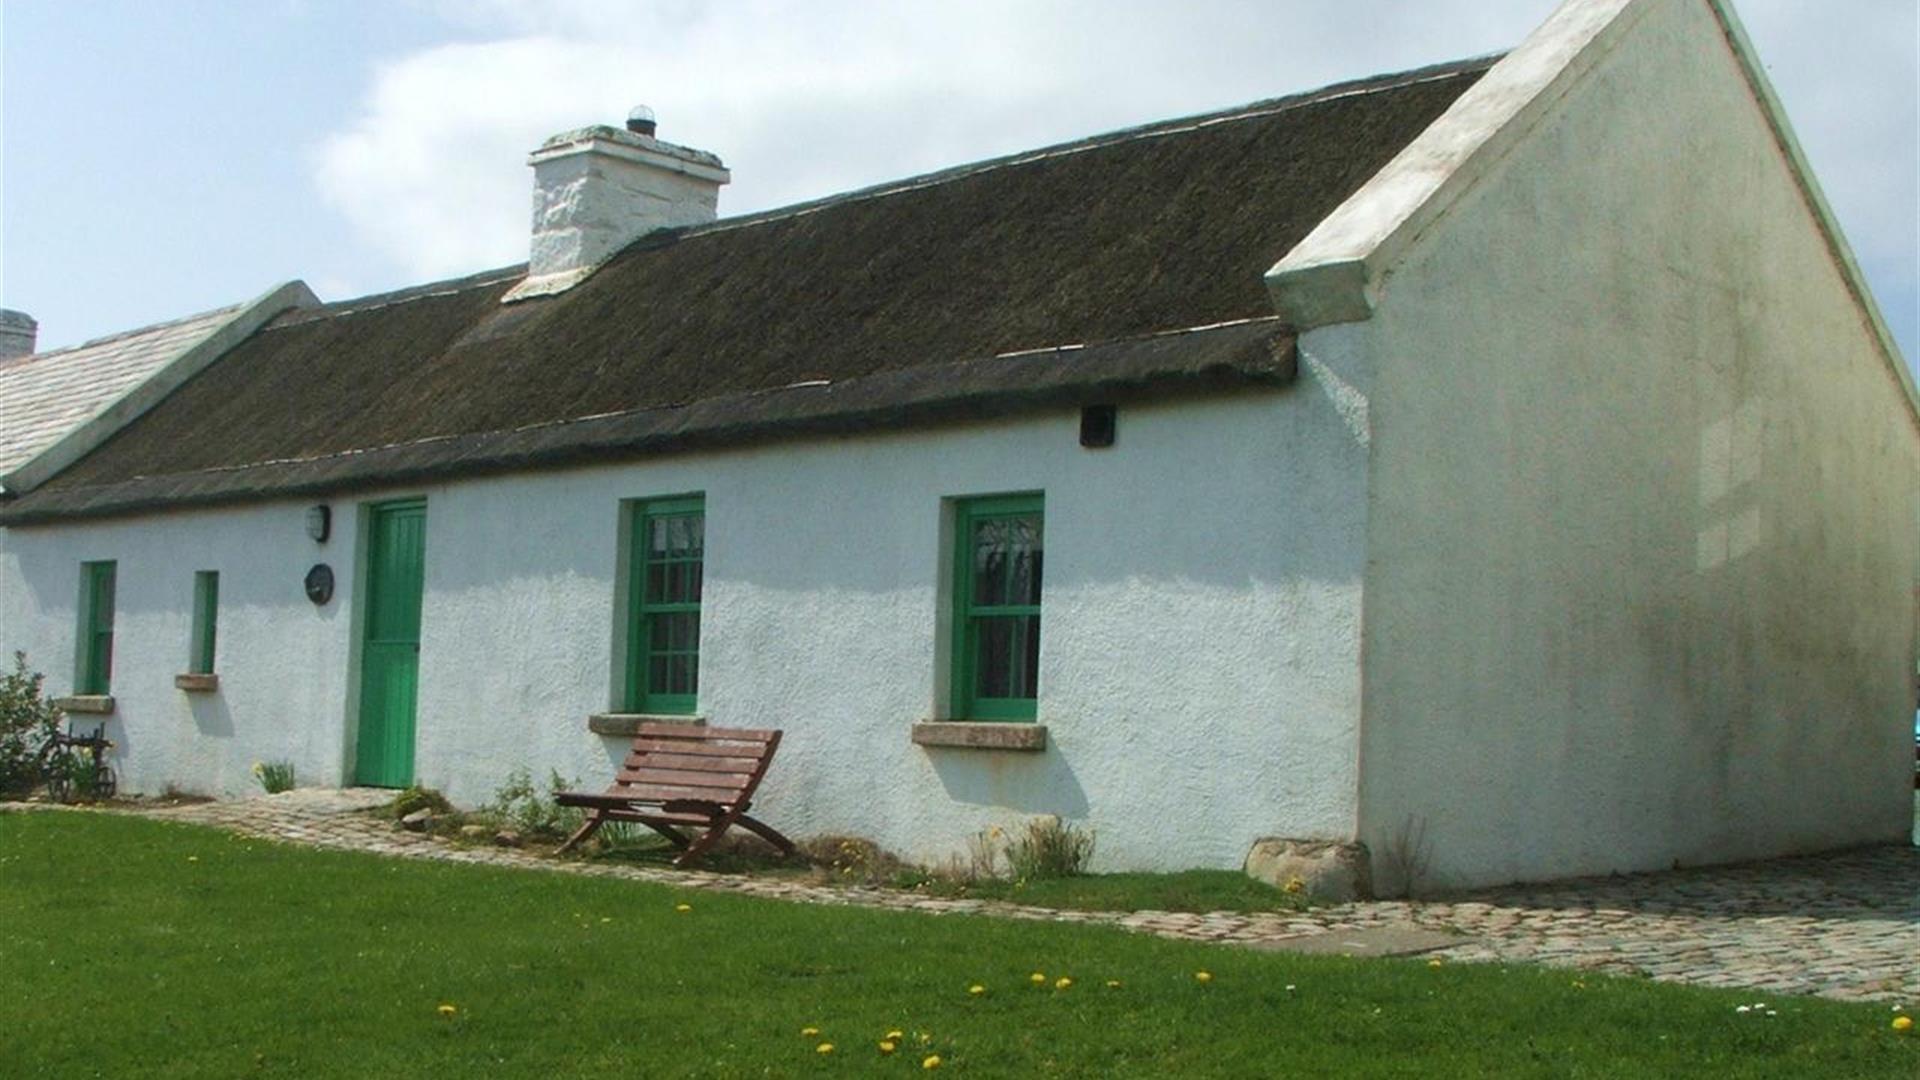 Hanna's Close Holiday Cottages - William John's Cottage